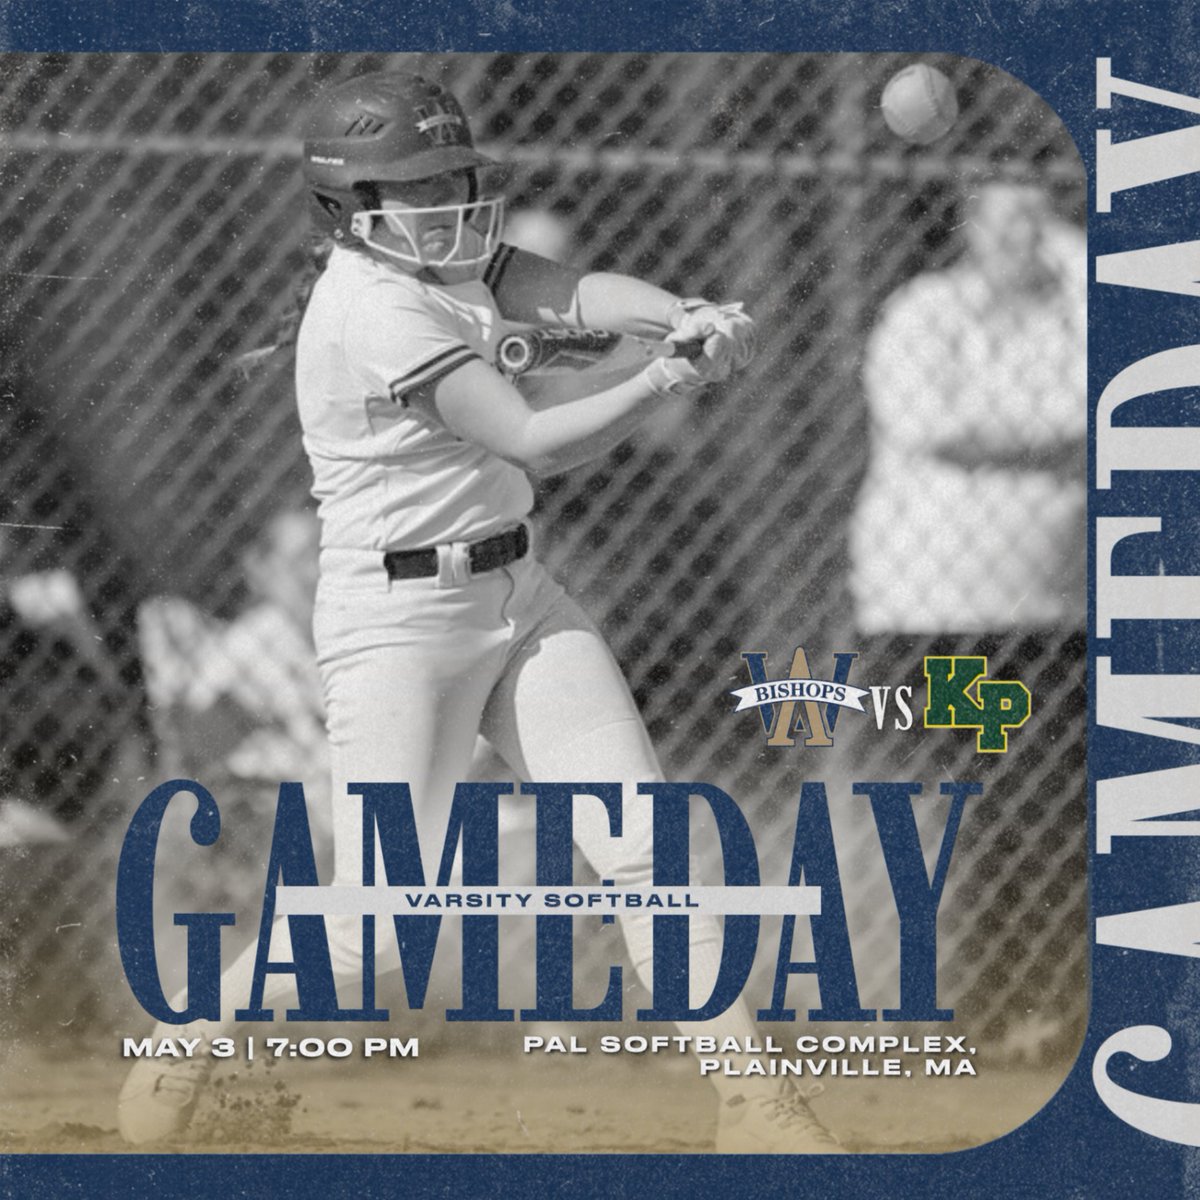 SOFTBALL: The Bishops head to @kpathletics tonight for a game under the lights! First pitch is 7pm! #rollbills @bishopssoftball